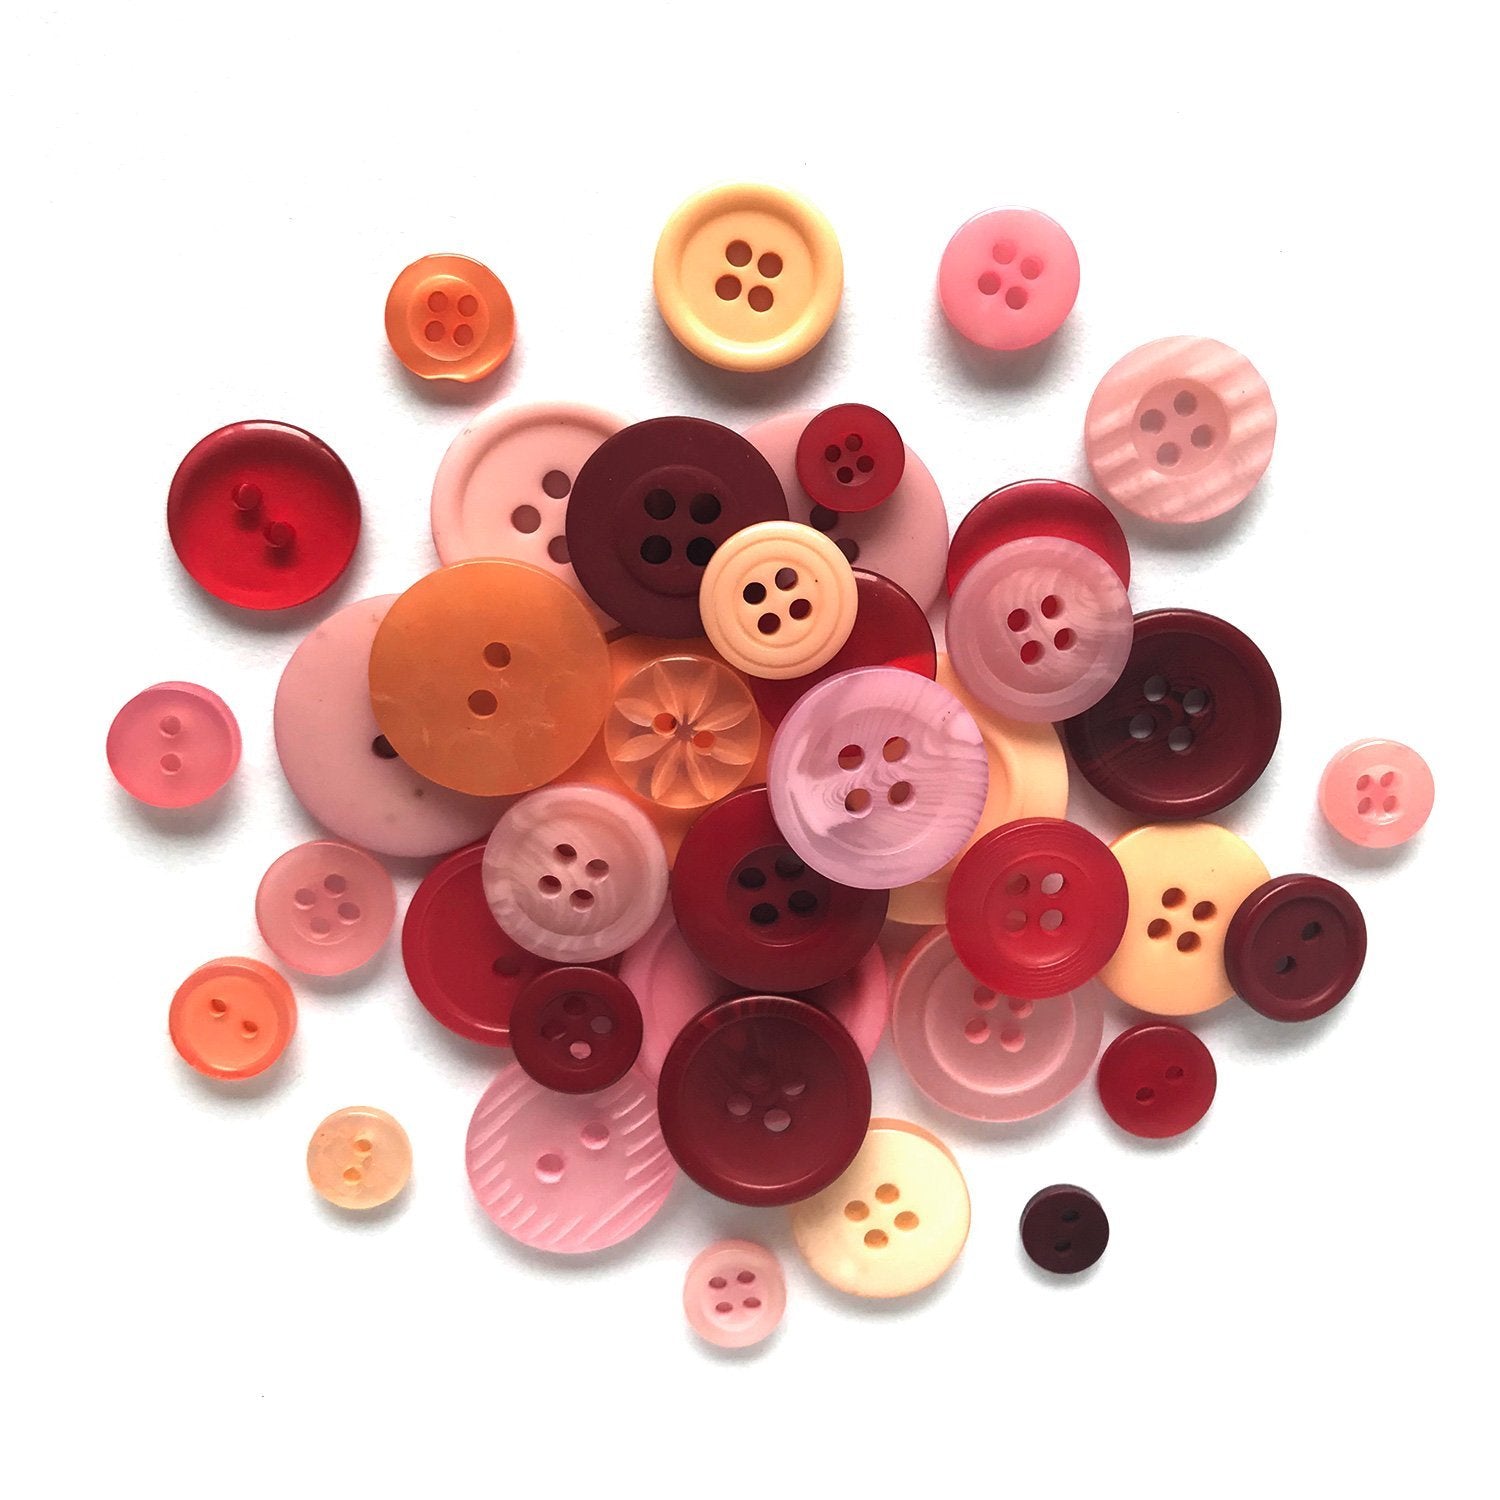 Vintage Rose - BB51 - Buttons Galore and More